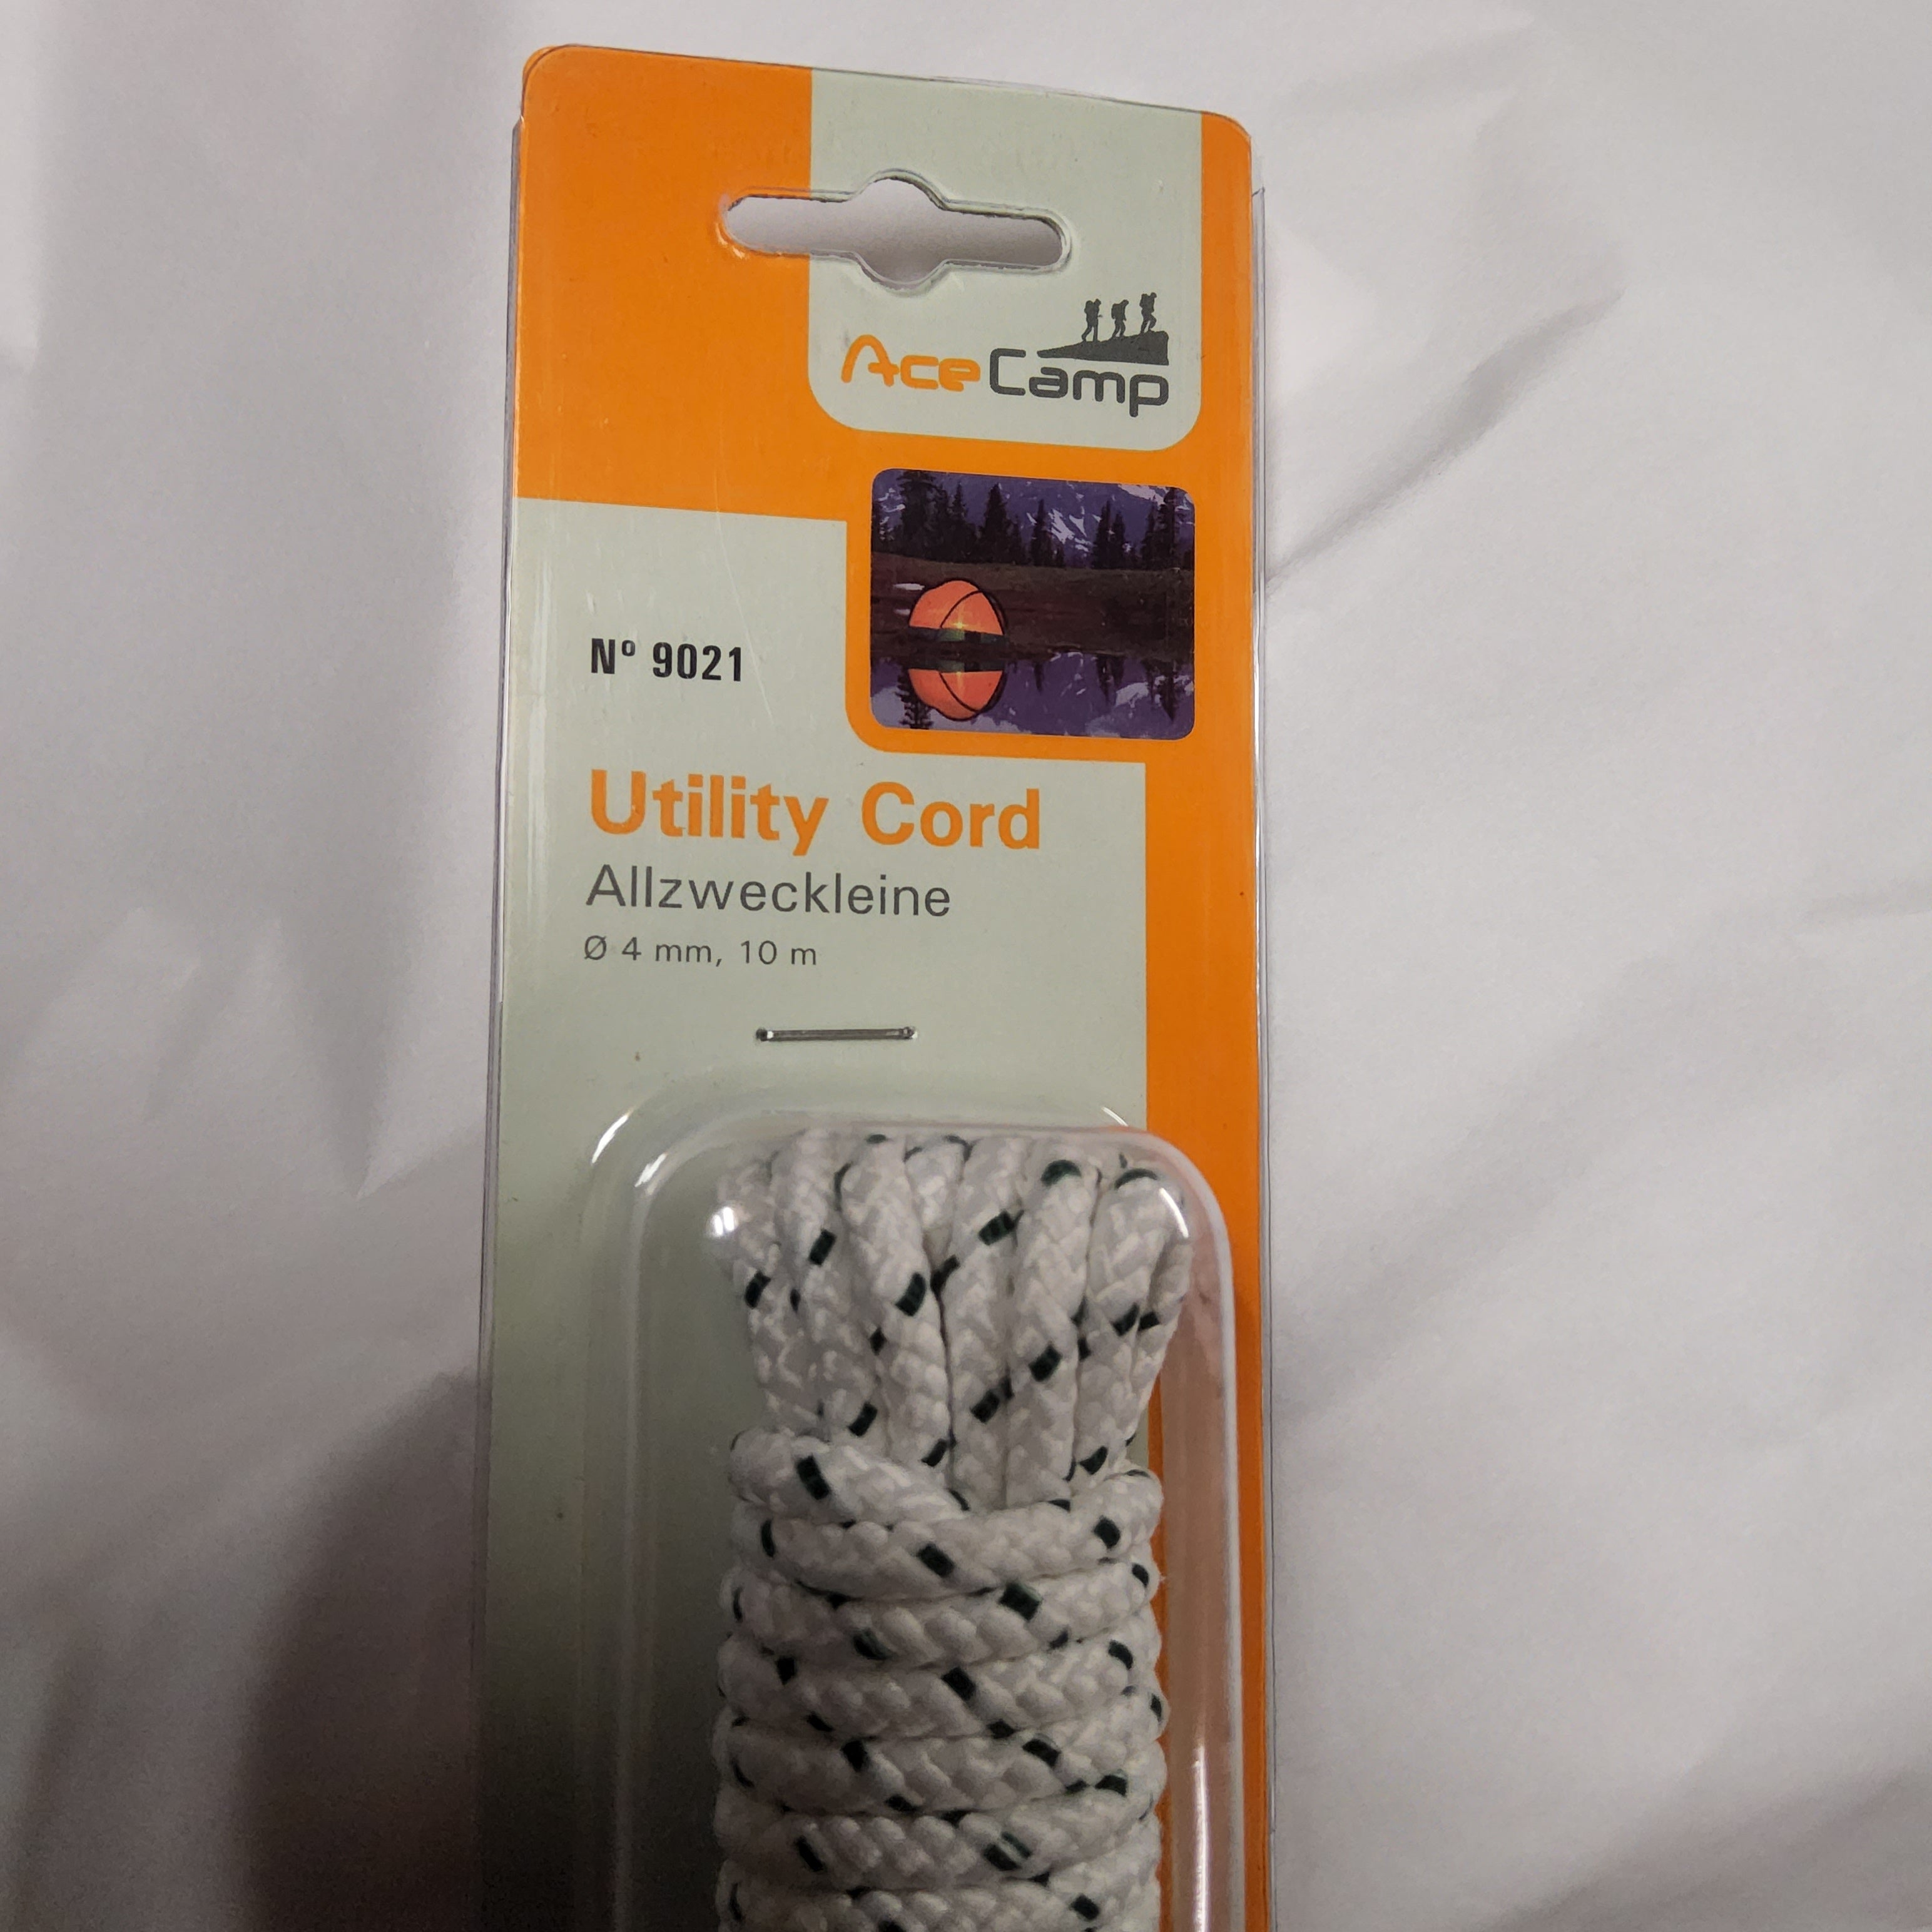 Ace Camp Utility Cord - Assorted sizes